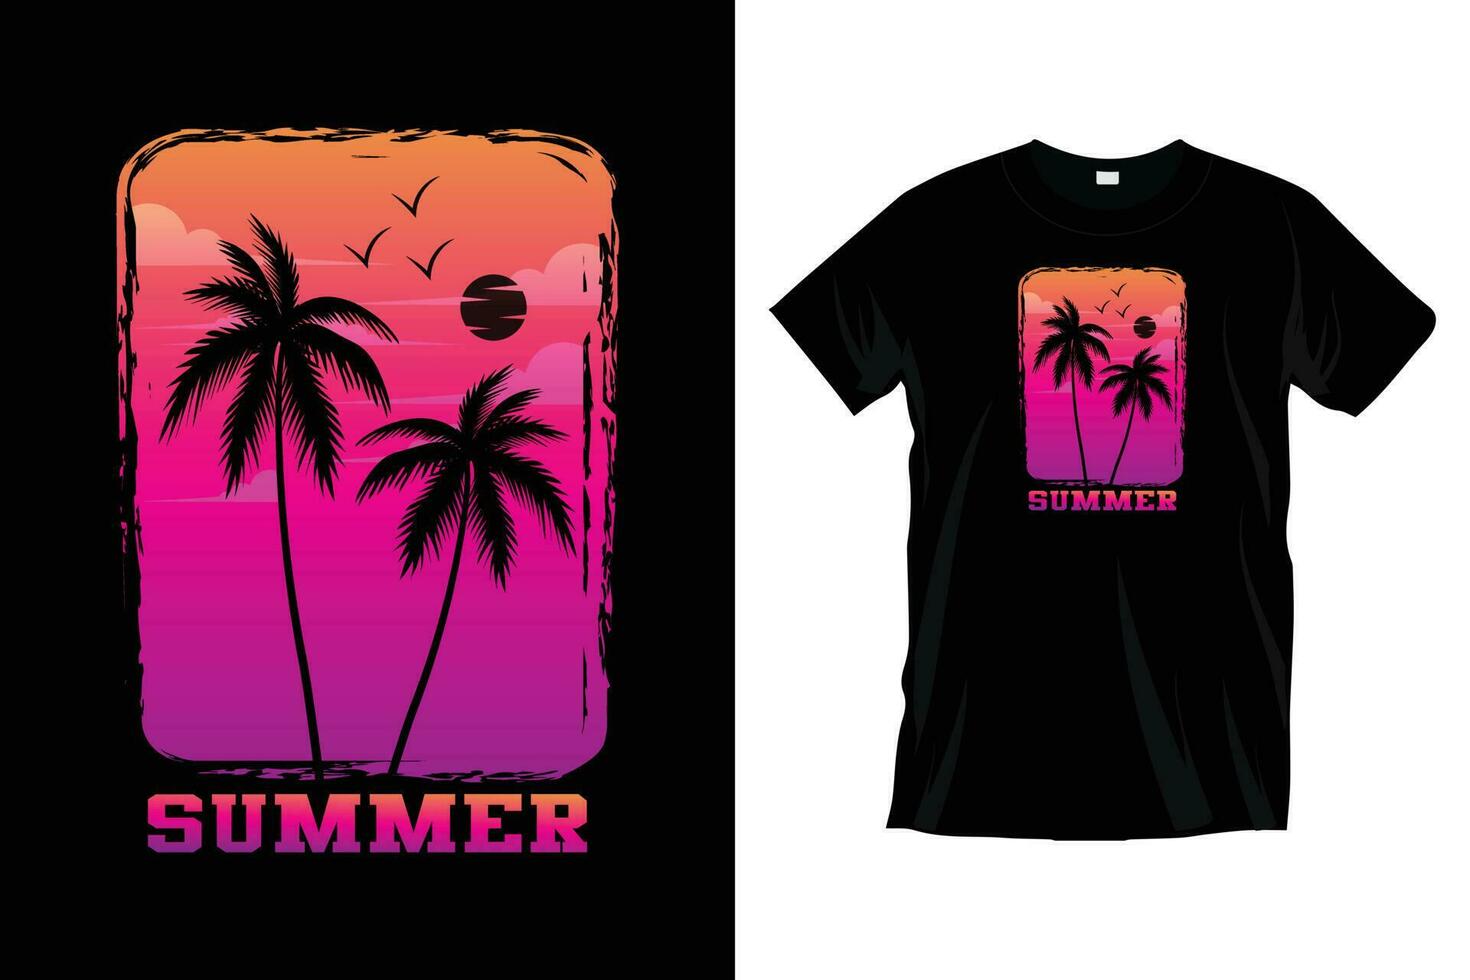 California Ocean side stylish t-shirt and apparel trendy design with palm trees silhouettes, typography, print, vector illustration. Summer Vacation t shirt design vector.